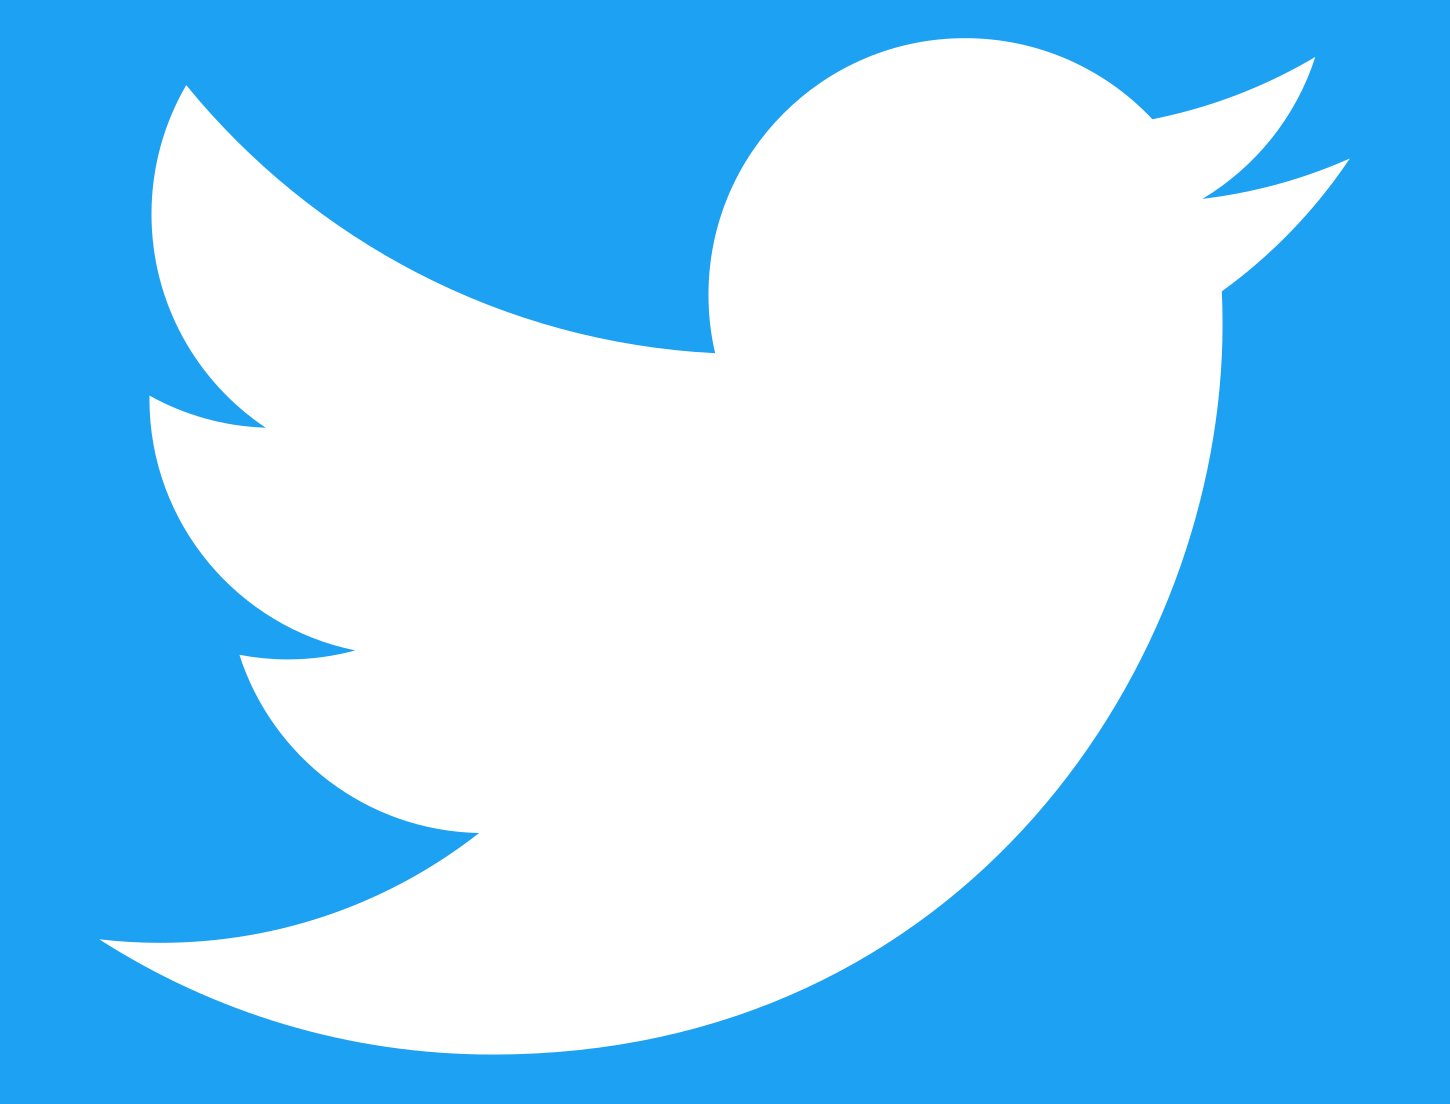 Twitter users younger, better educated than general public: survey